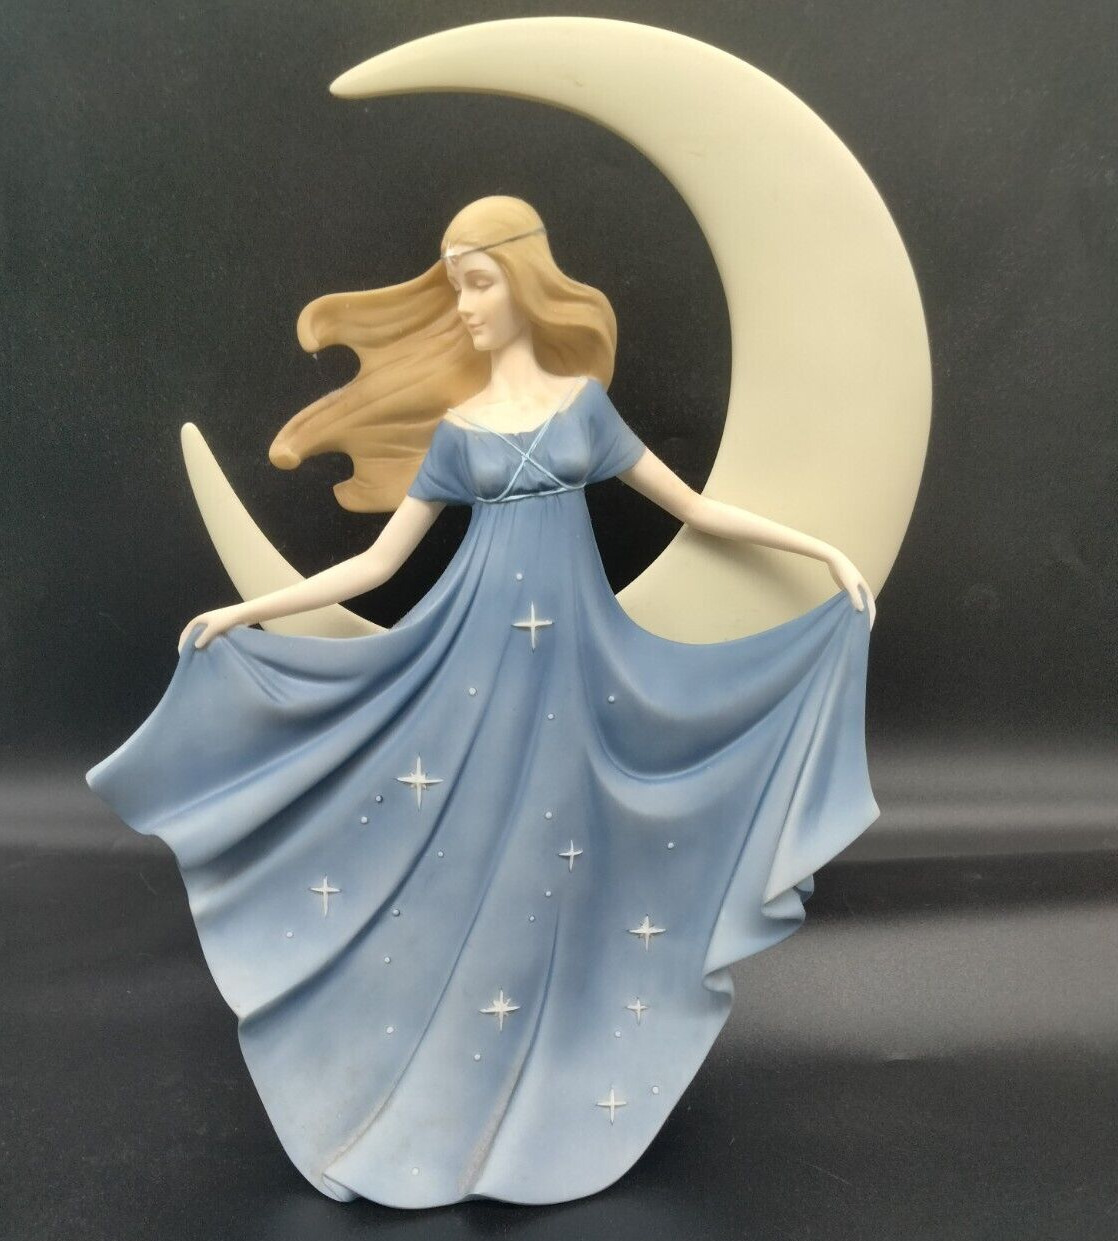 CloudWorks Angel “Moonlight Night” 41403 Lady with Crescent Moon 2003 Figurine